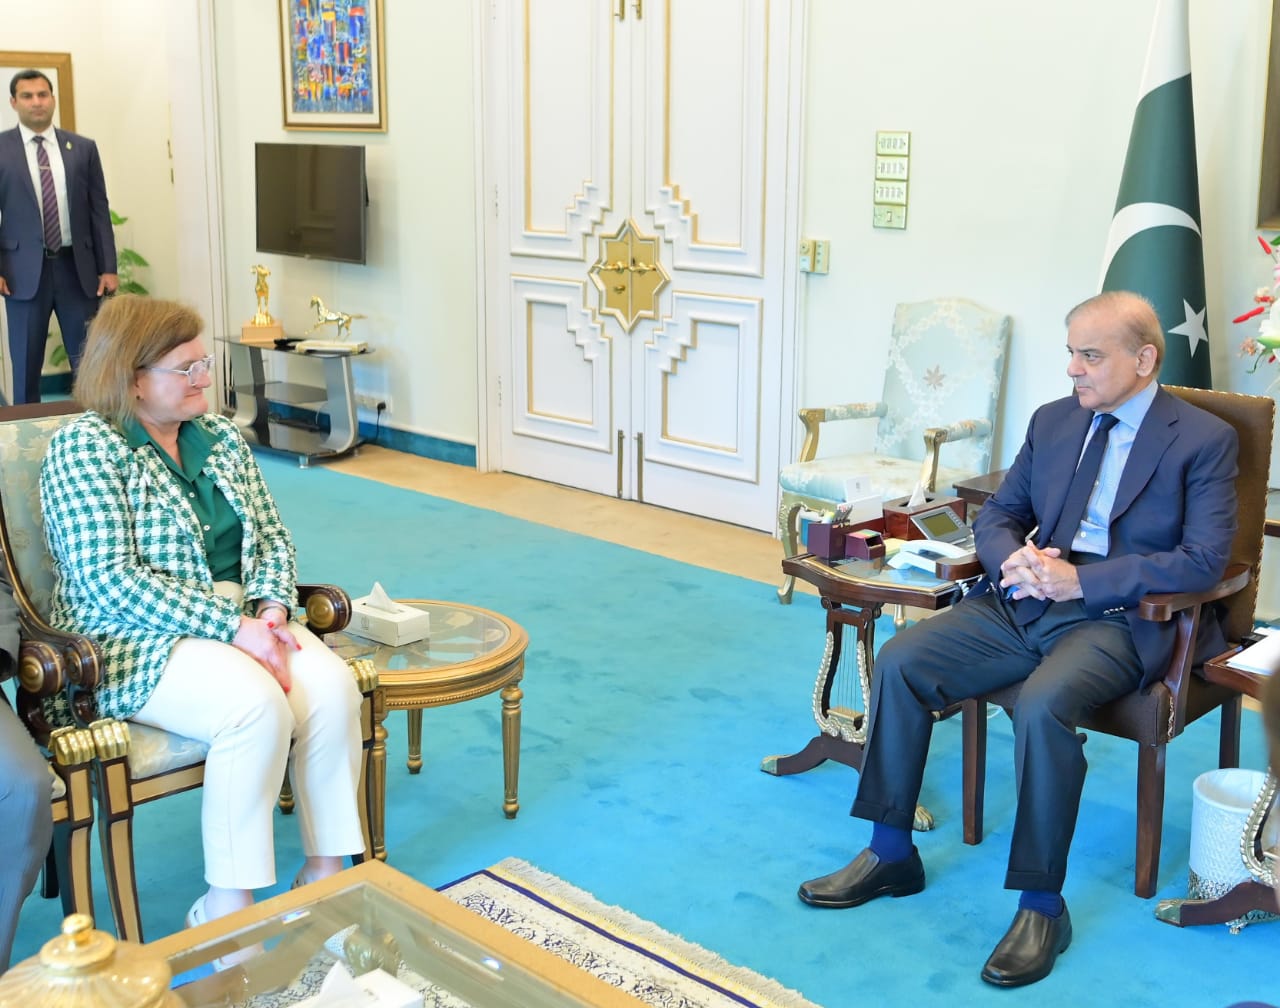 Pakistan highly values its multifaceted ties with Italy: PM